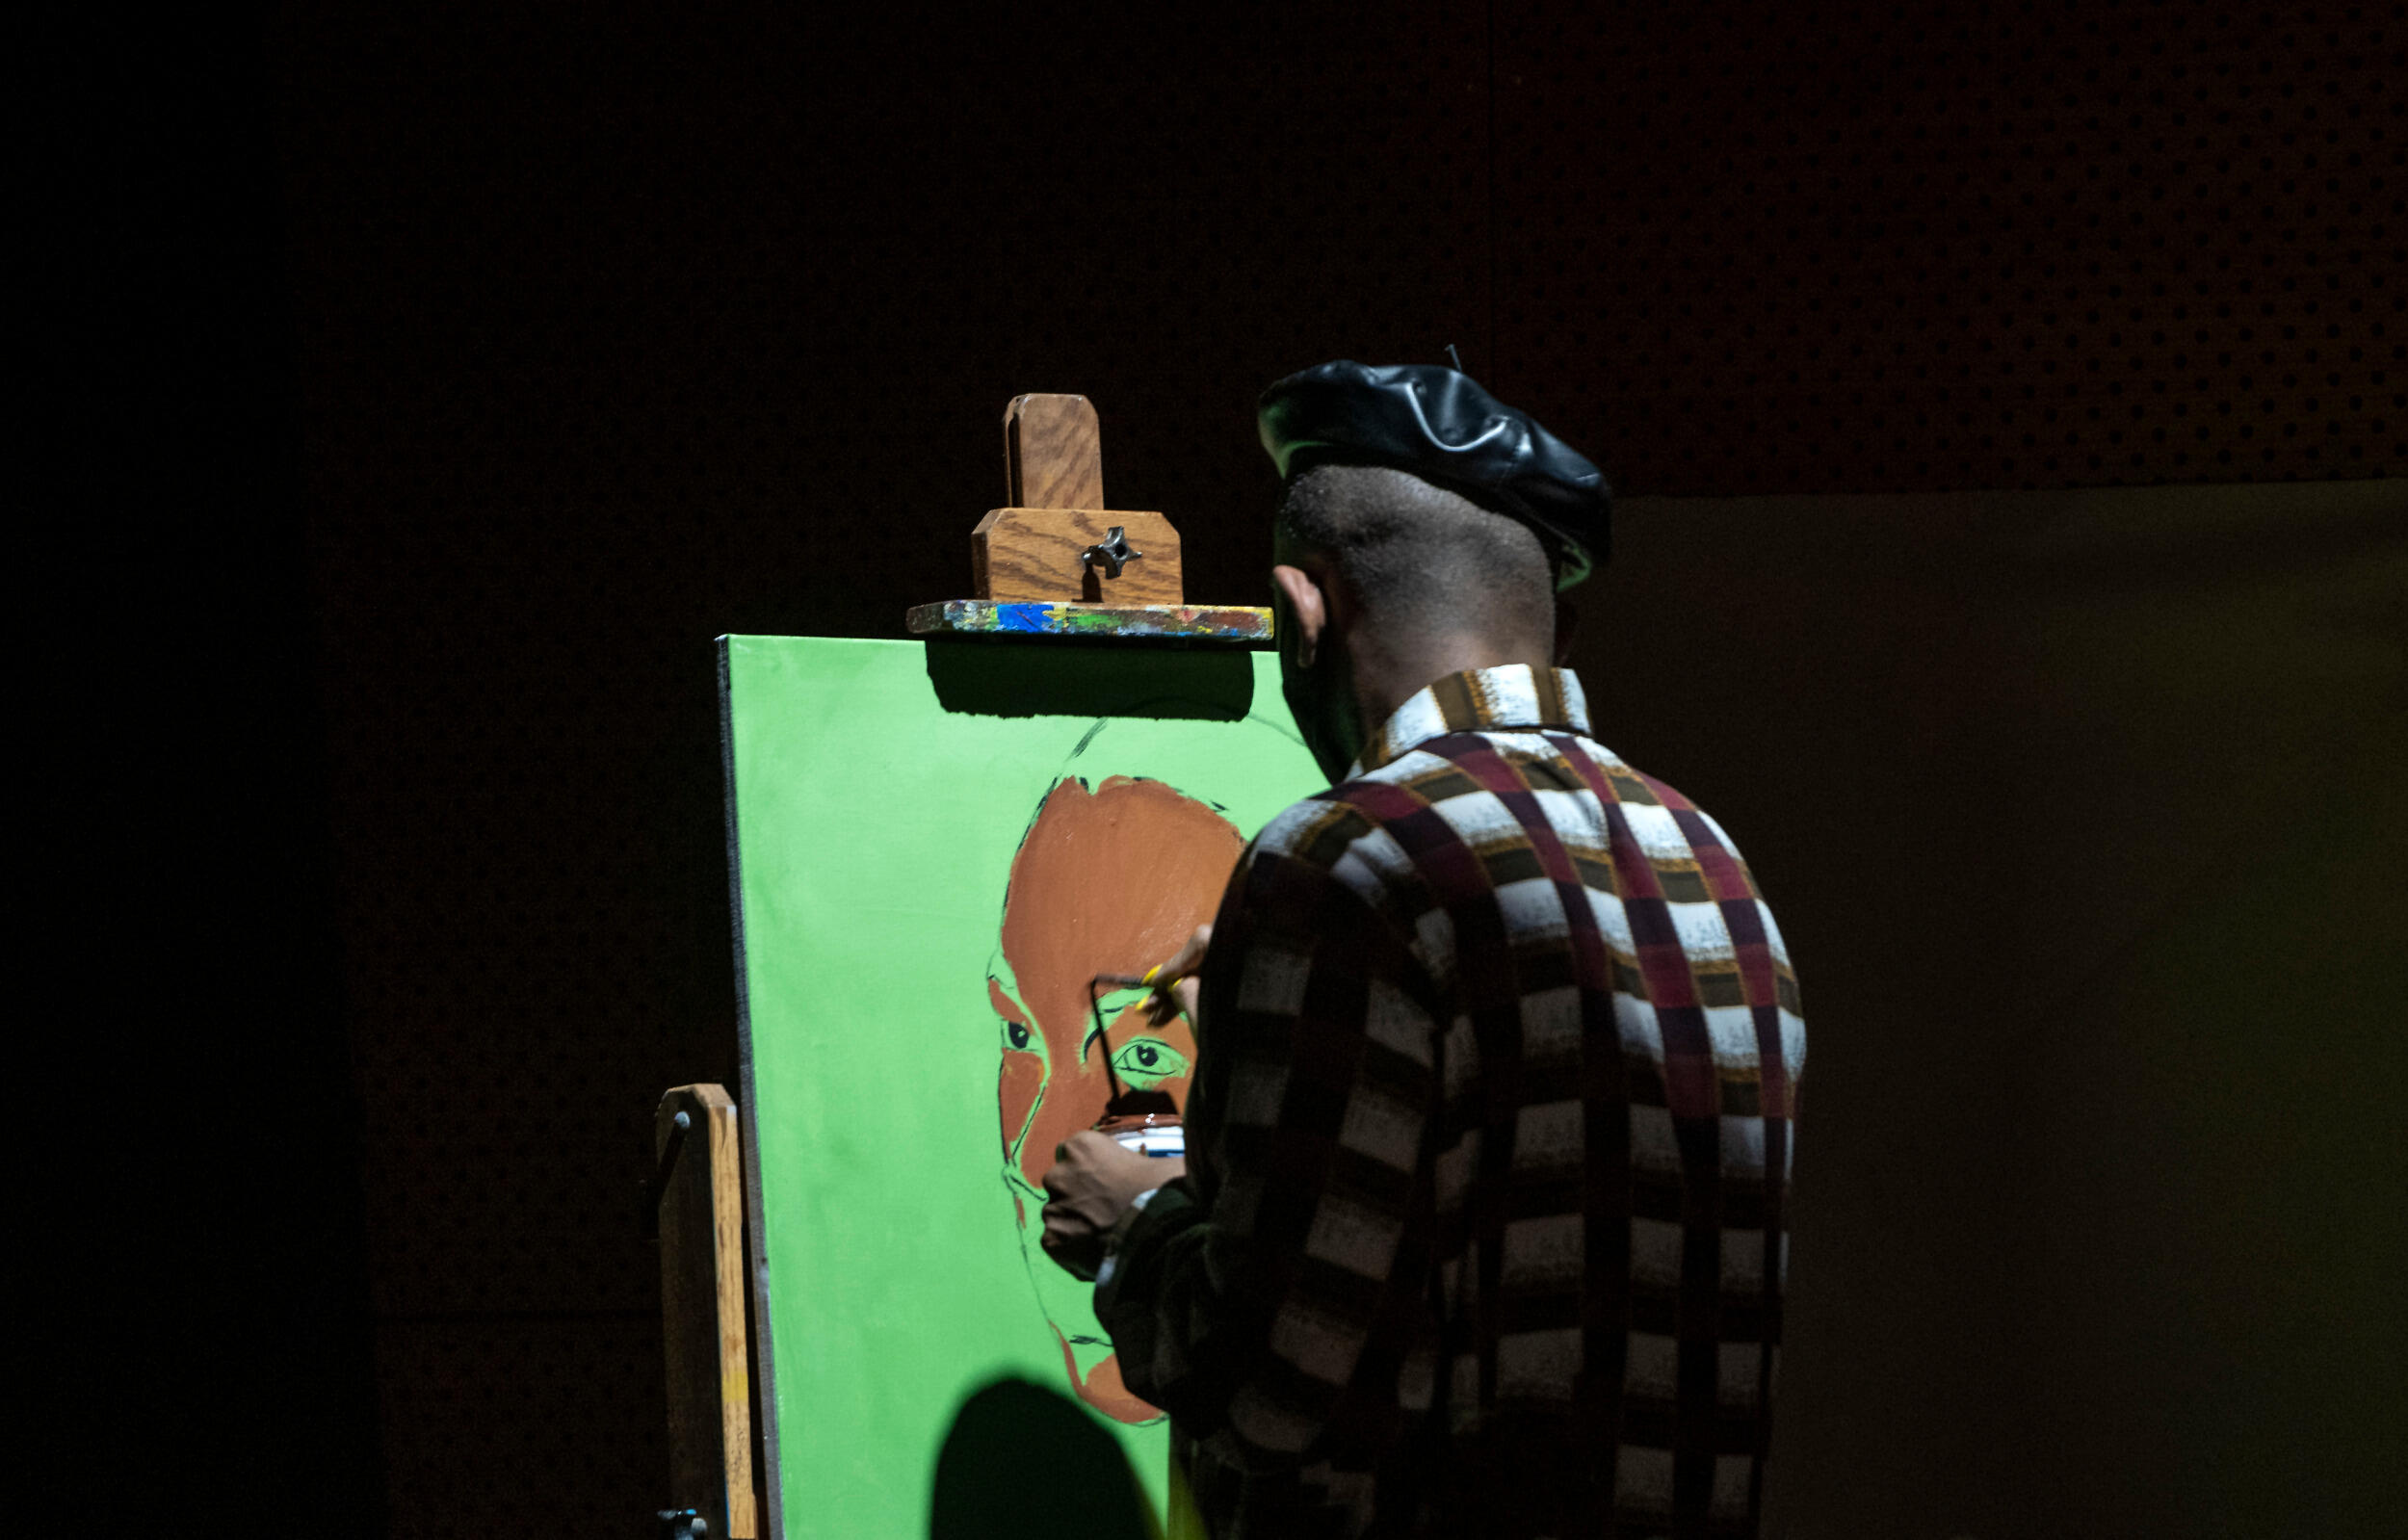 A painter with his back to the camera works on a painting with green background